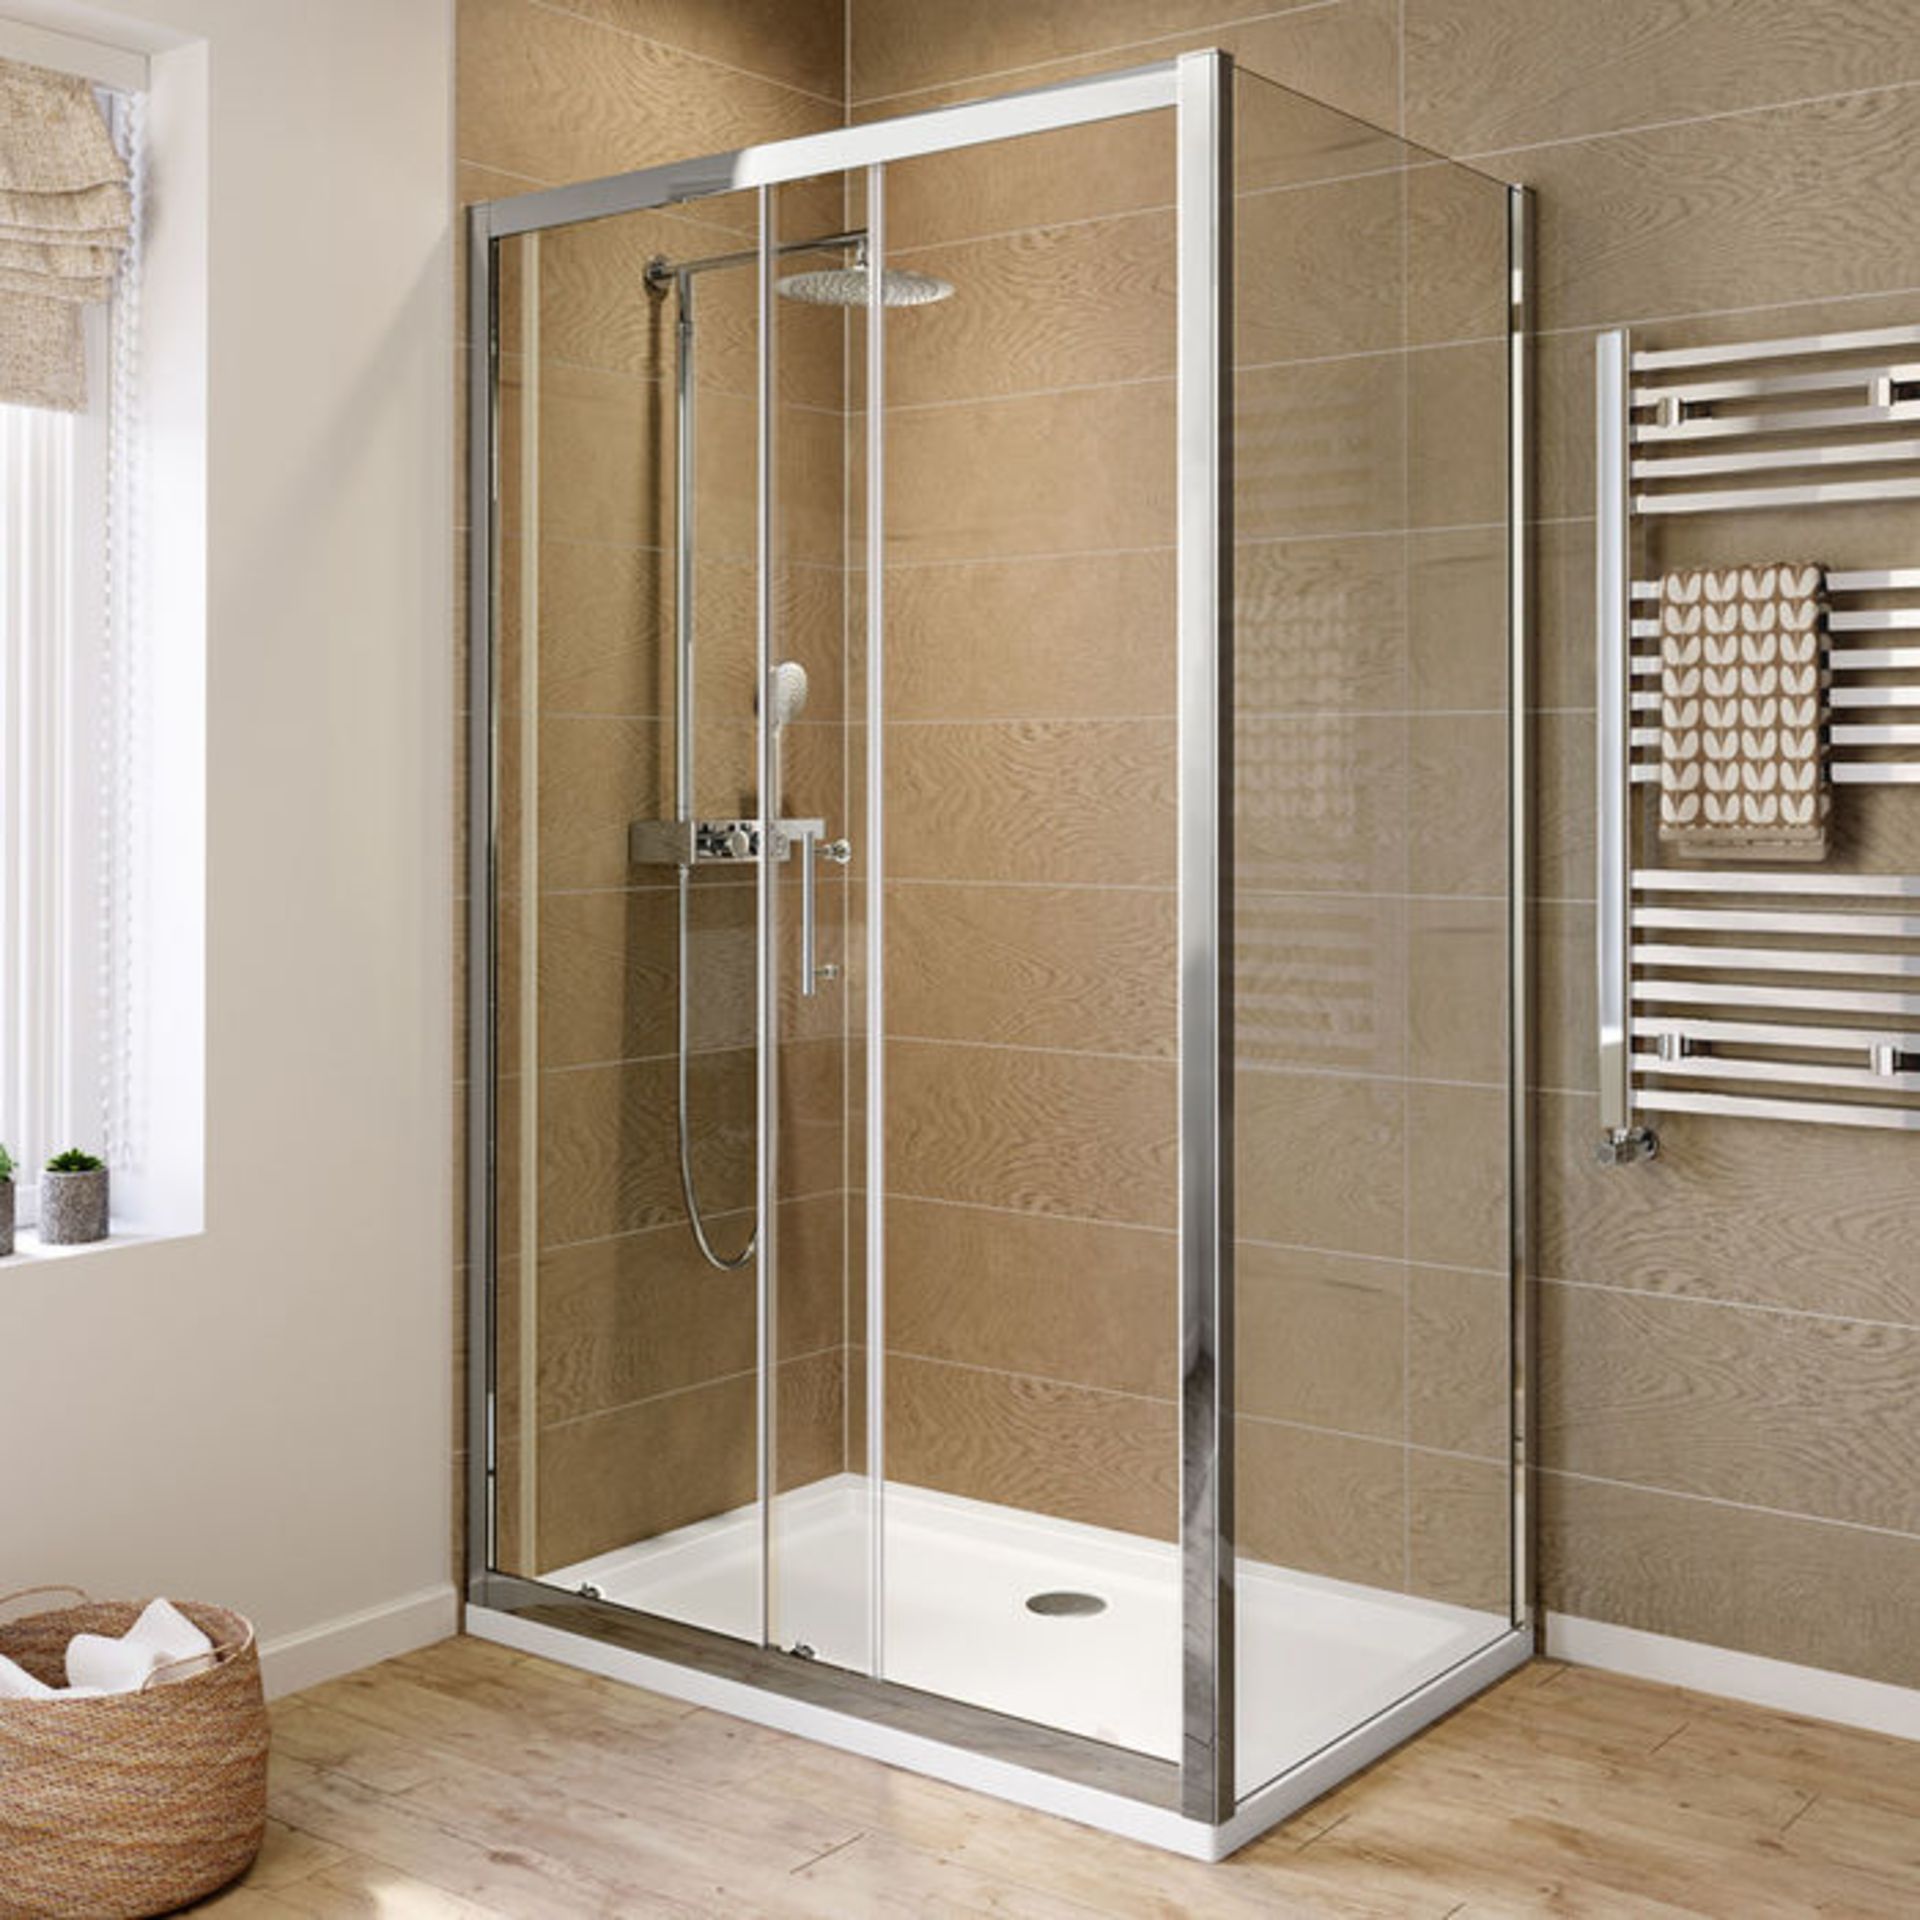 New 1700x700mm - 6mm - Elements Sliding Door Shower Enclosure. RRP £363.99.6mm Safety Glass F... - Image 2 of 2